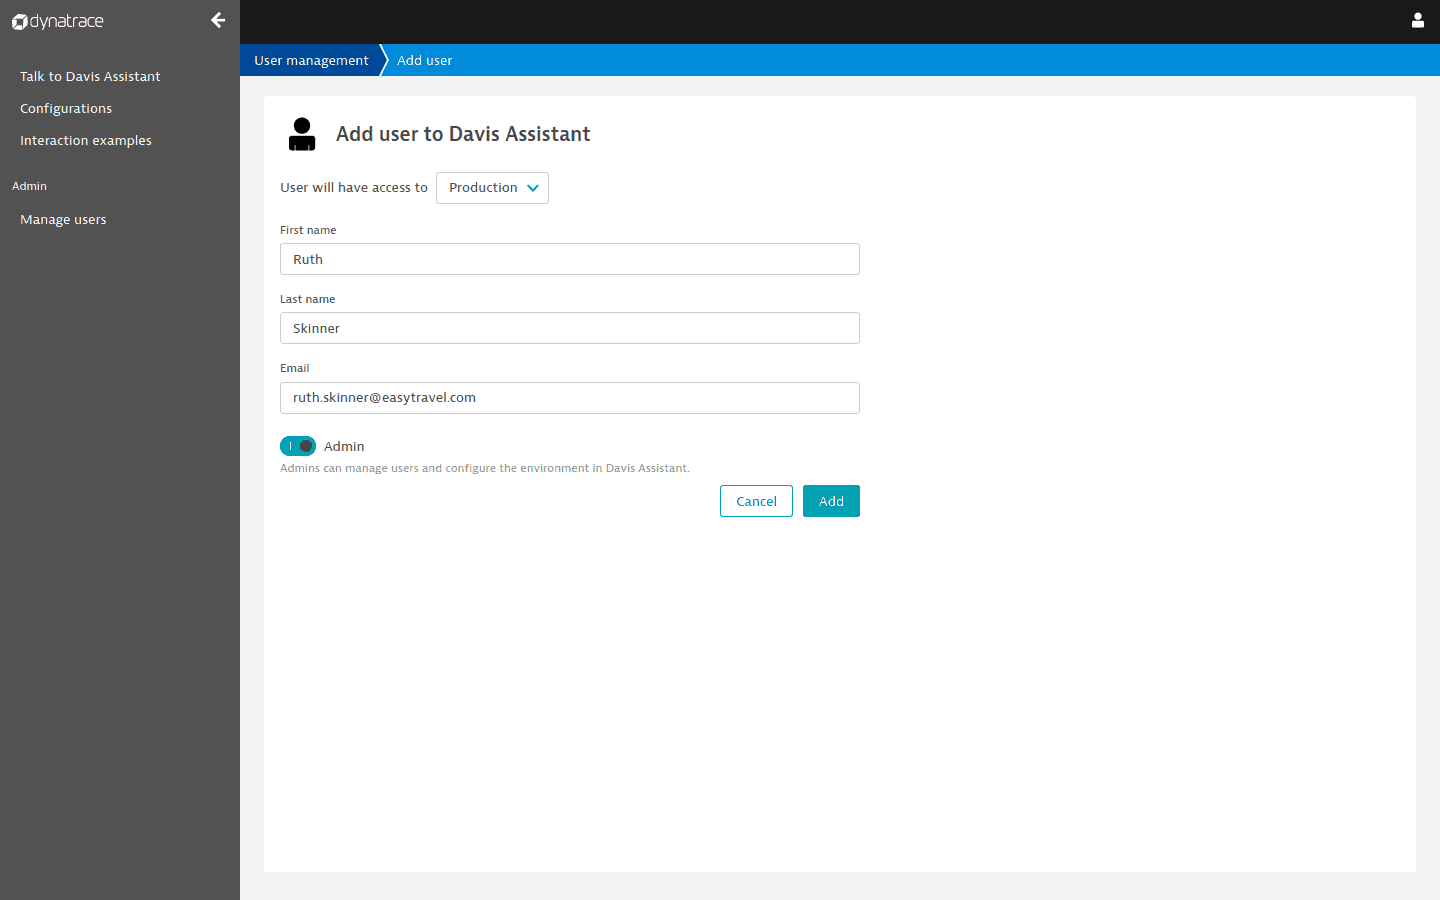 Add a user account to Davis Assistant